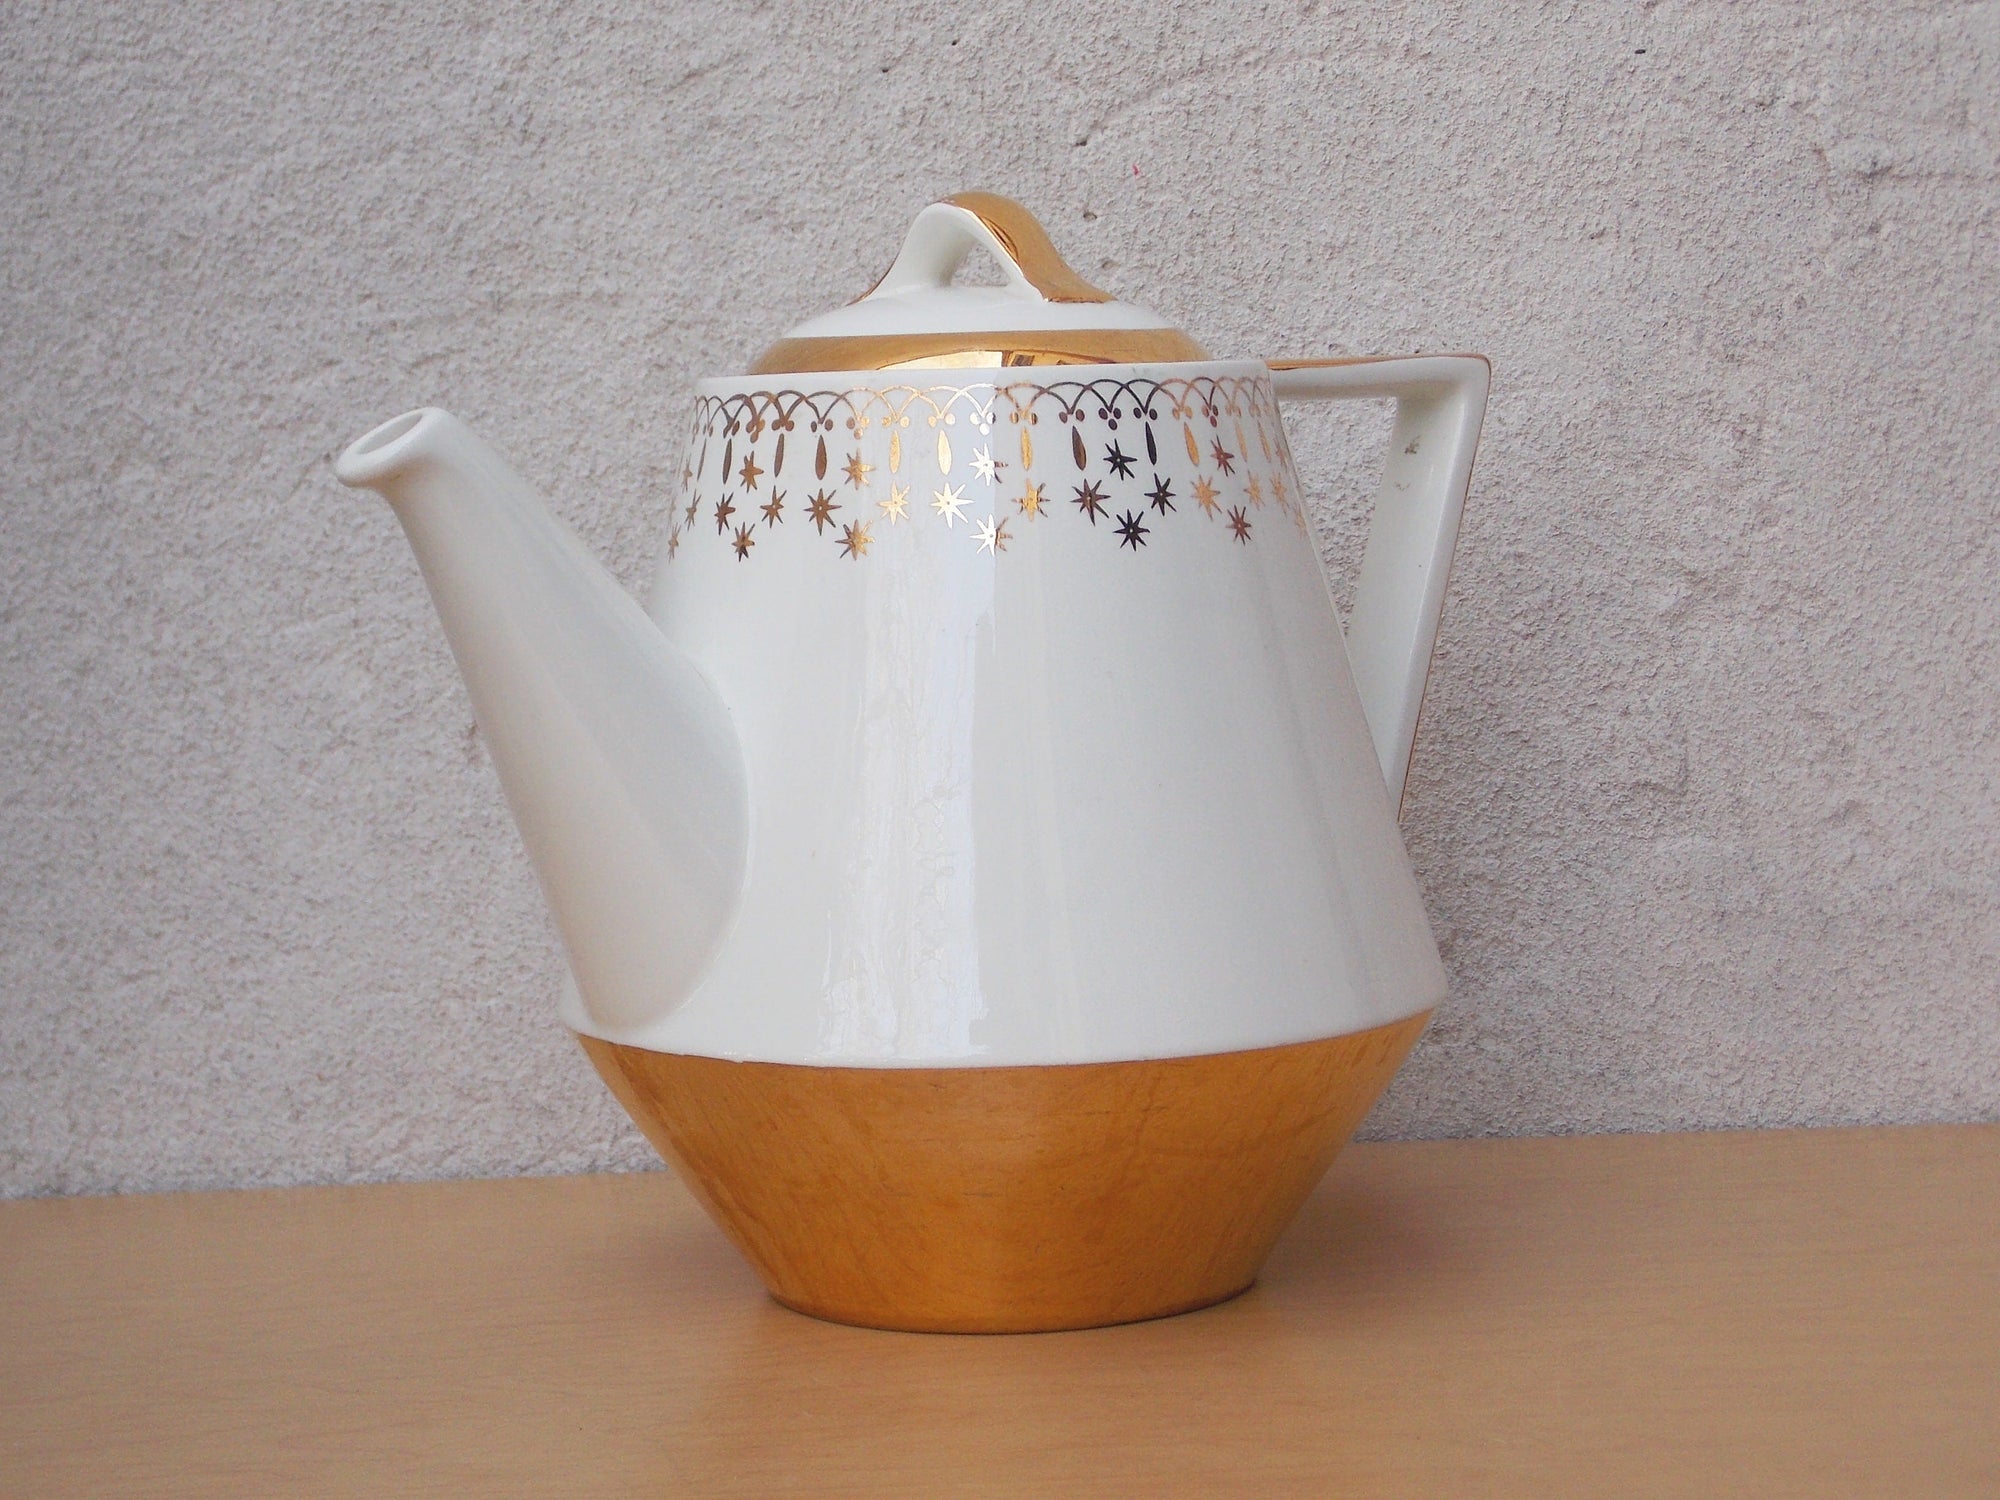 I Like Mike's Mid Century Modern Accessories Very Large White Gold Ceramic Tea or Coffee Pot with Atomic Stars, Flare-Ware